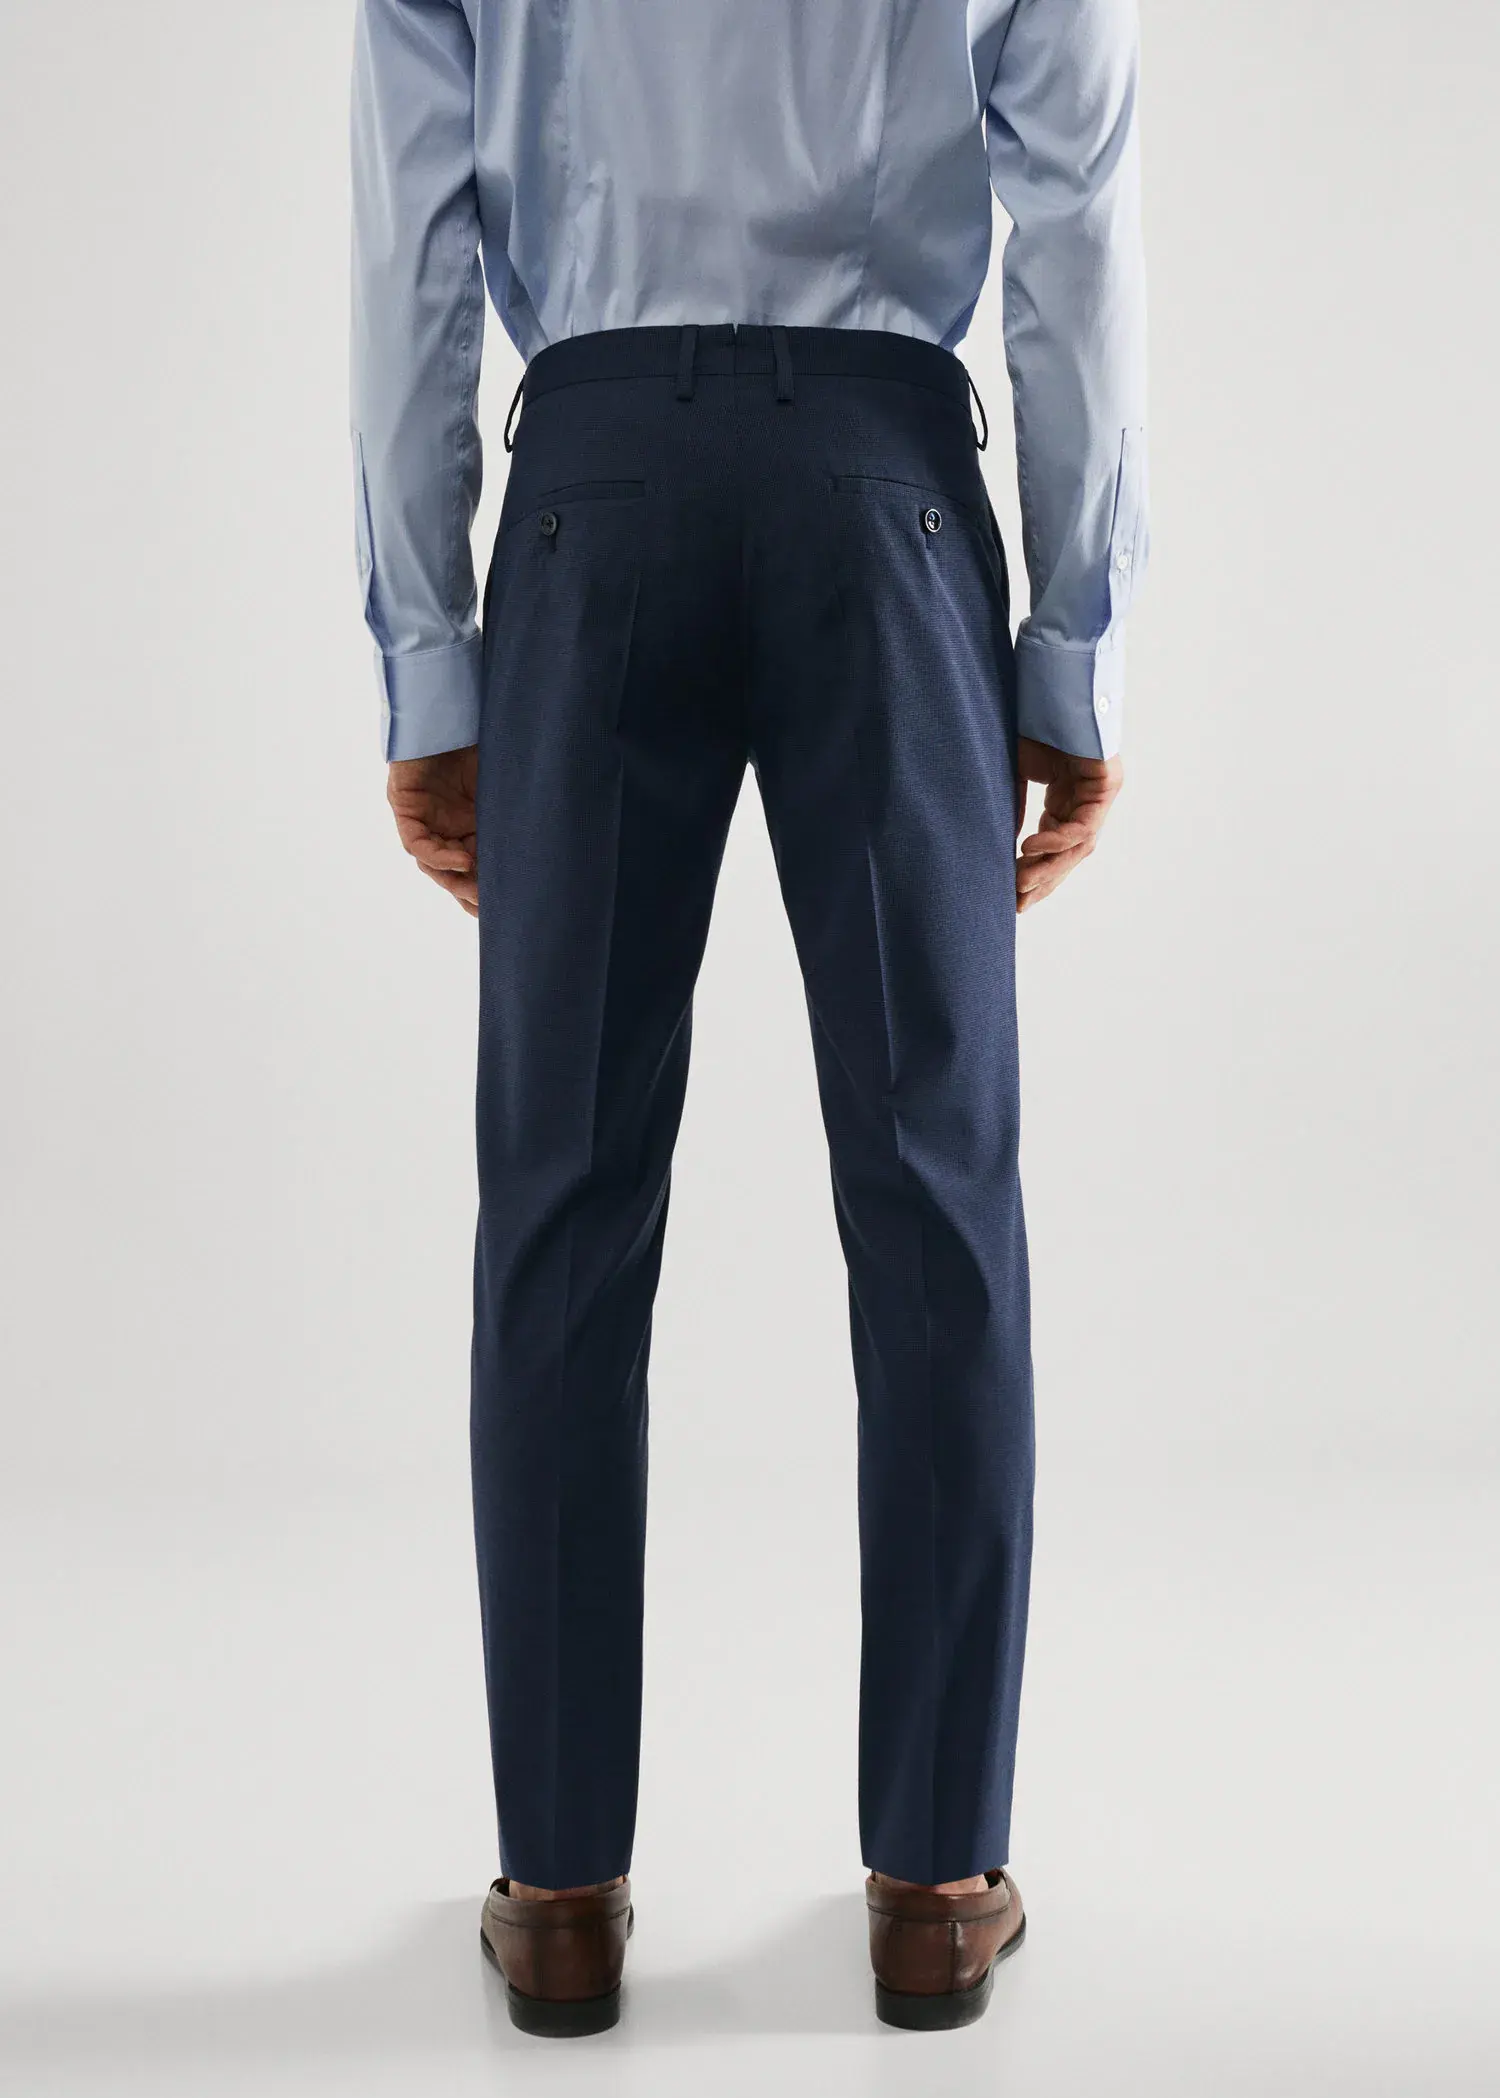 Mango Super slim fit printed suit pants. a man wearing a suit standing in front of a white wall. 